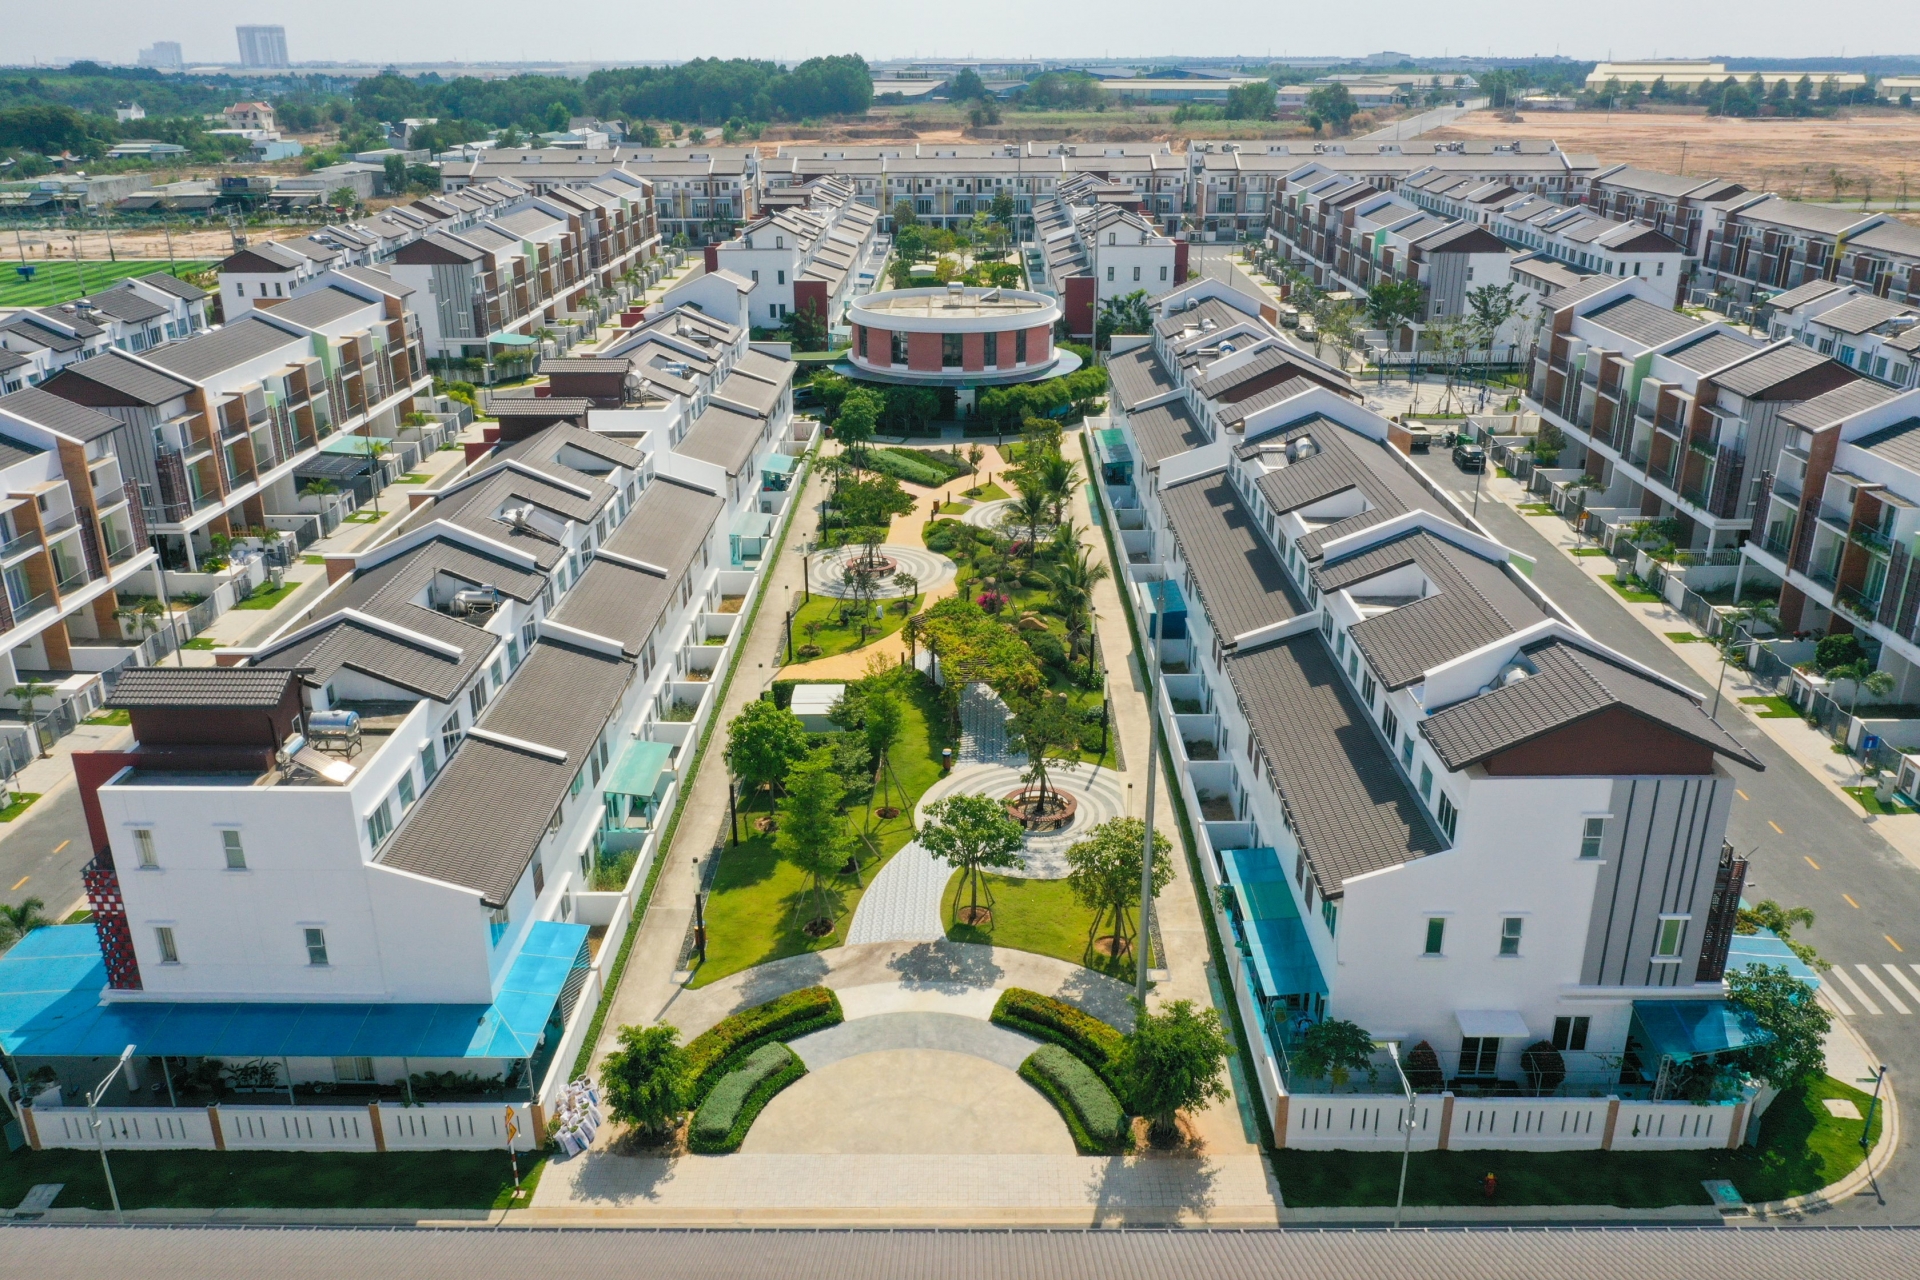 Sun Casa Central – Another successful housing project by VSIP in Binh Duong